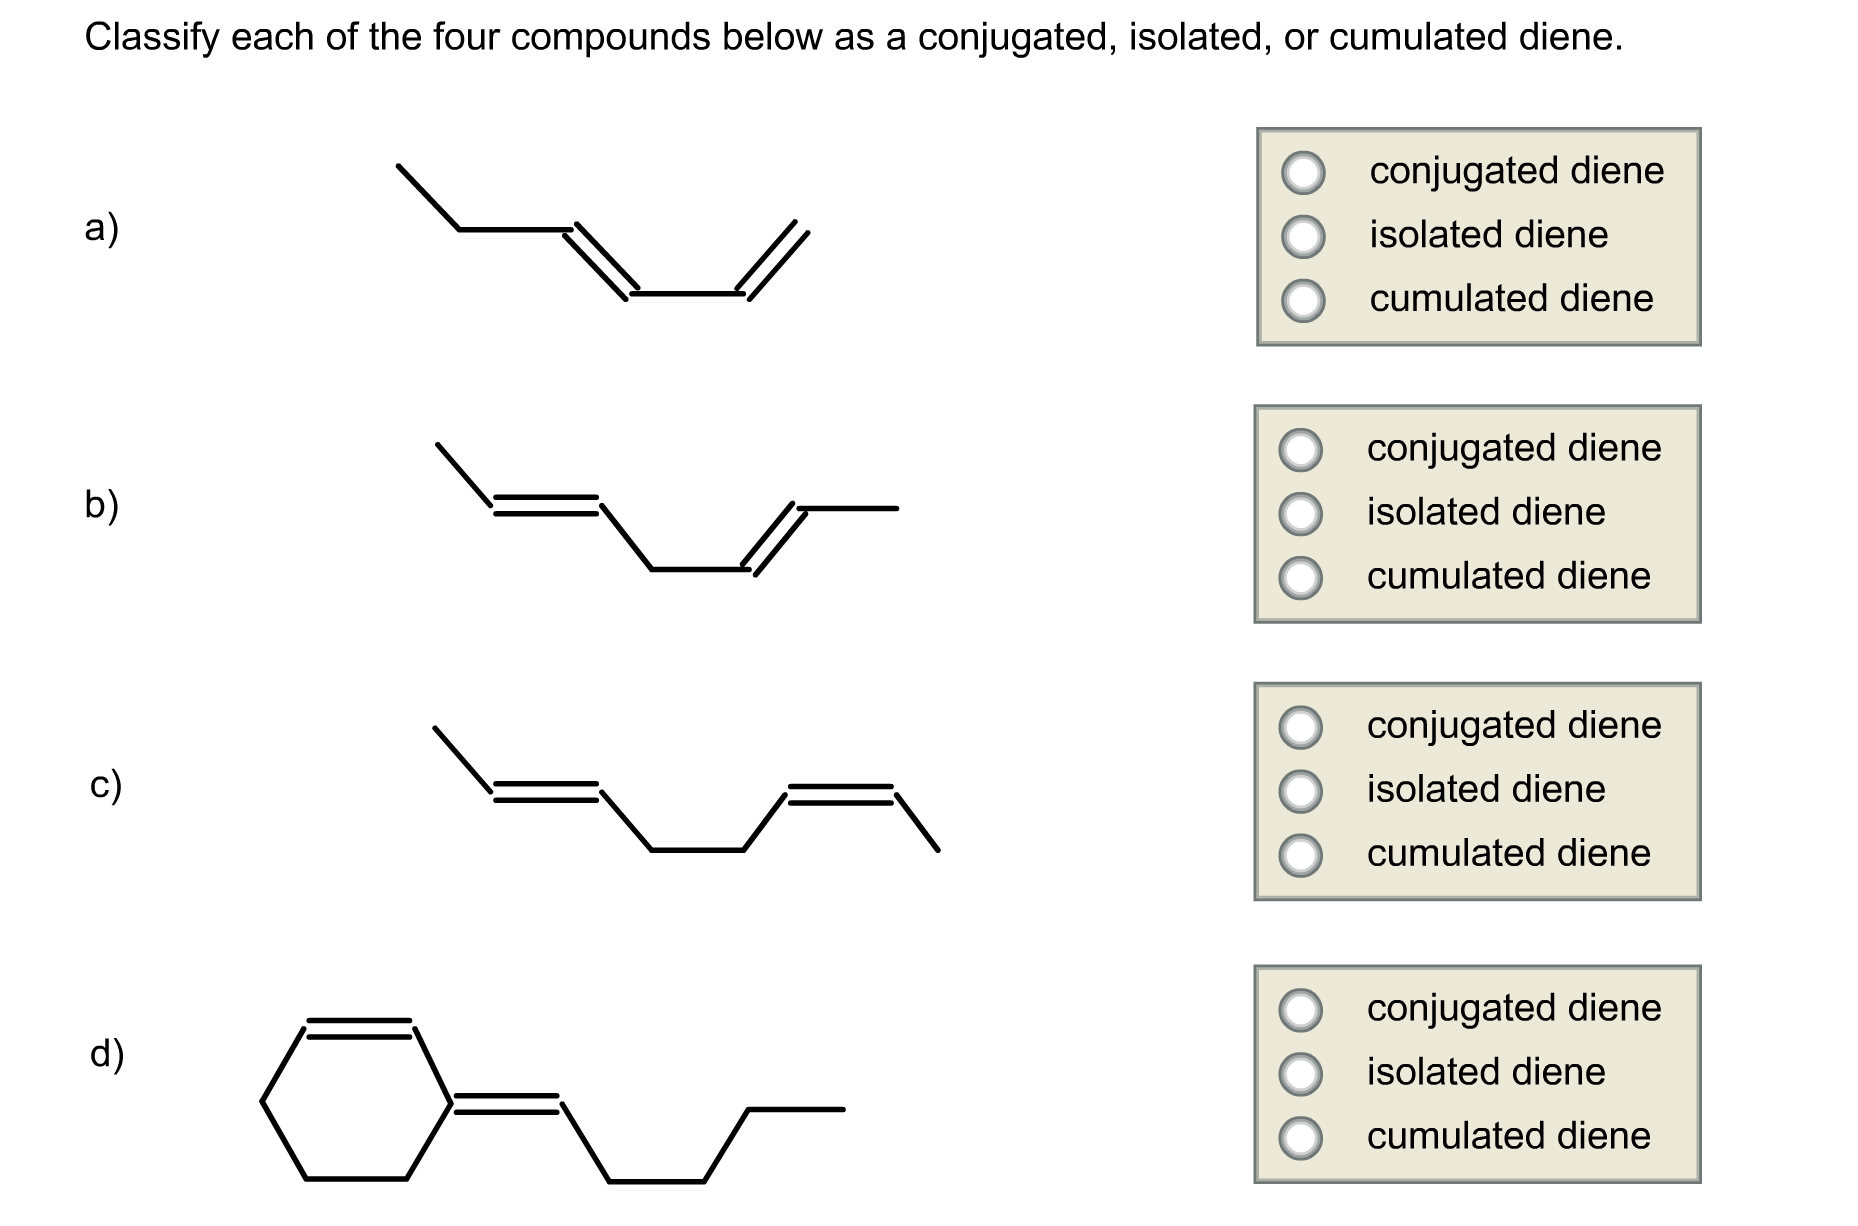 Classify each of the four compounds below as a con